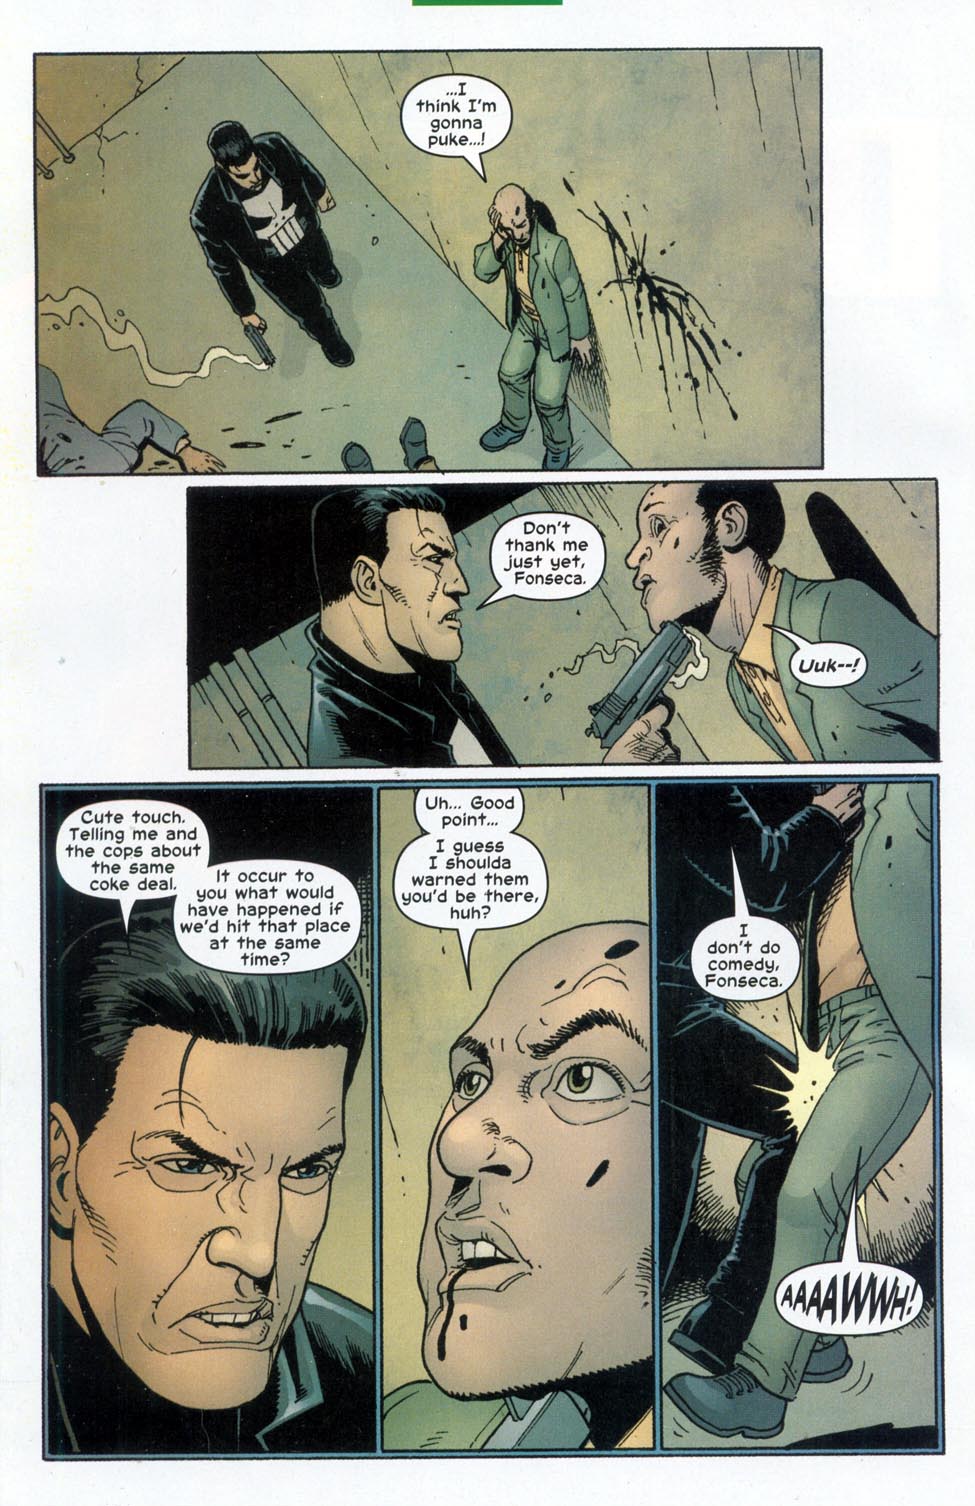 The Punisher (2001) issue 20 - Brotherhood #01 - Page 14